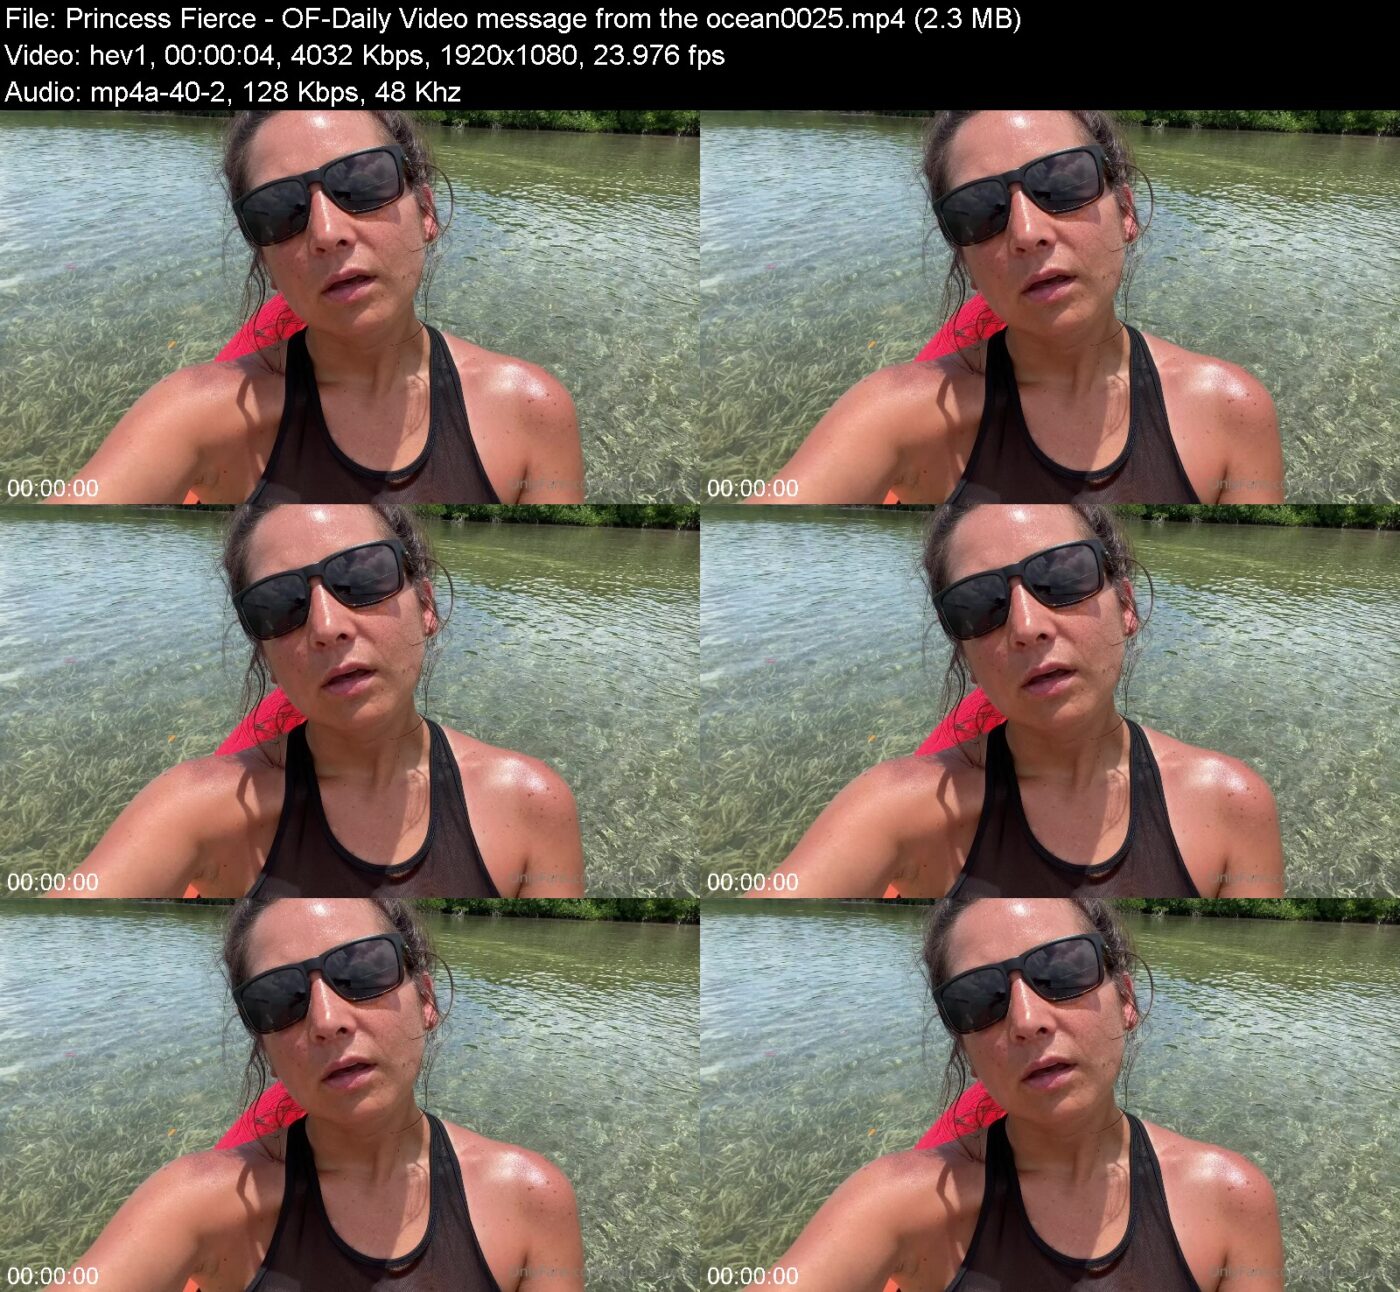 Princess Fierce in OF-Daily Video message from the ocean0025